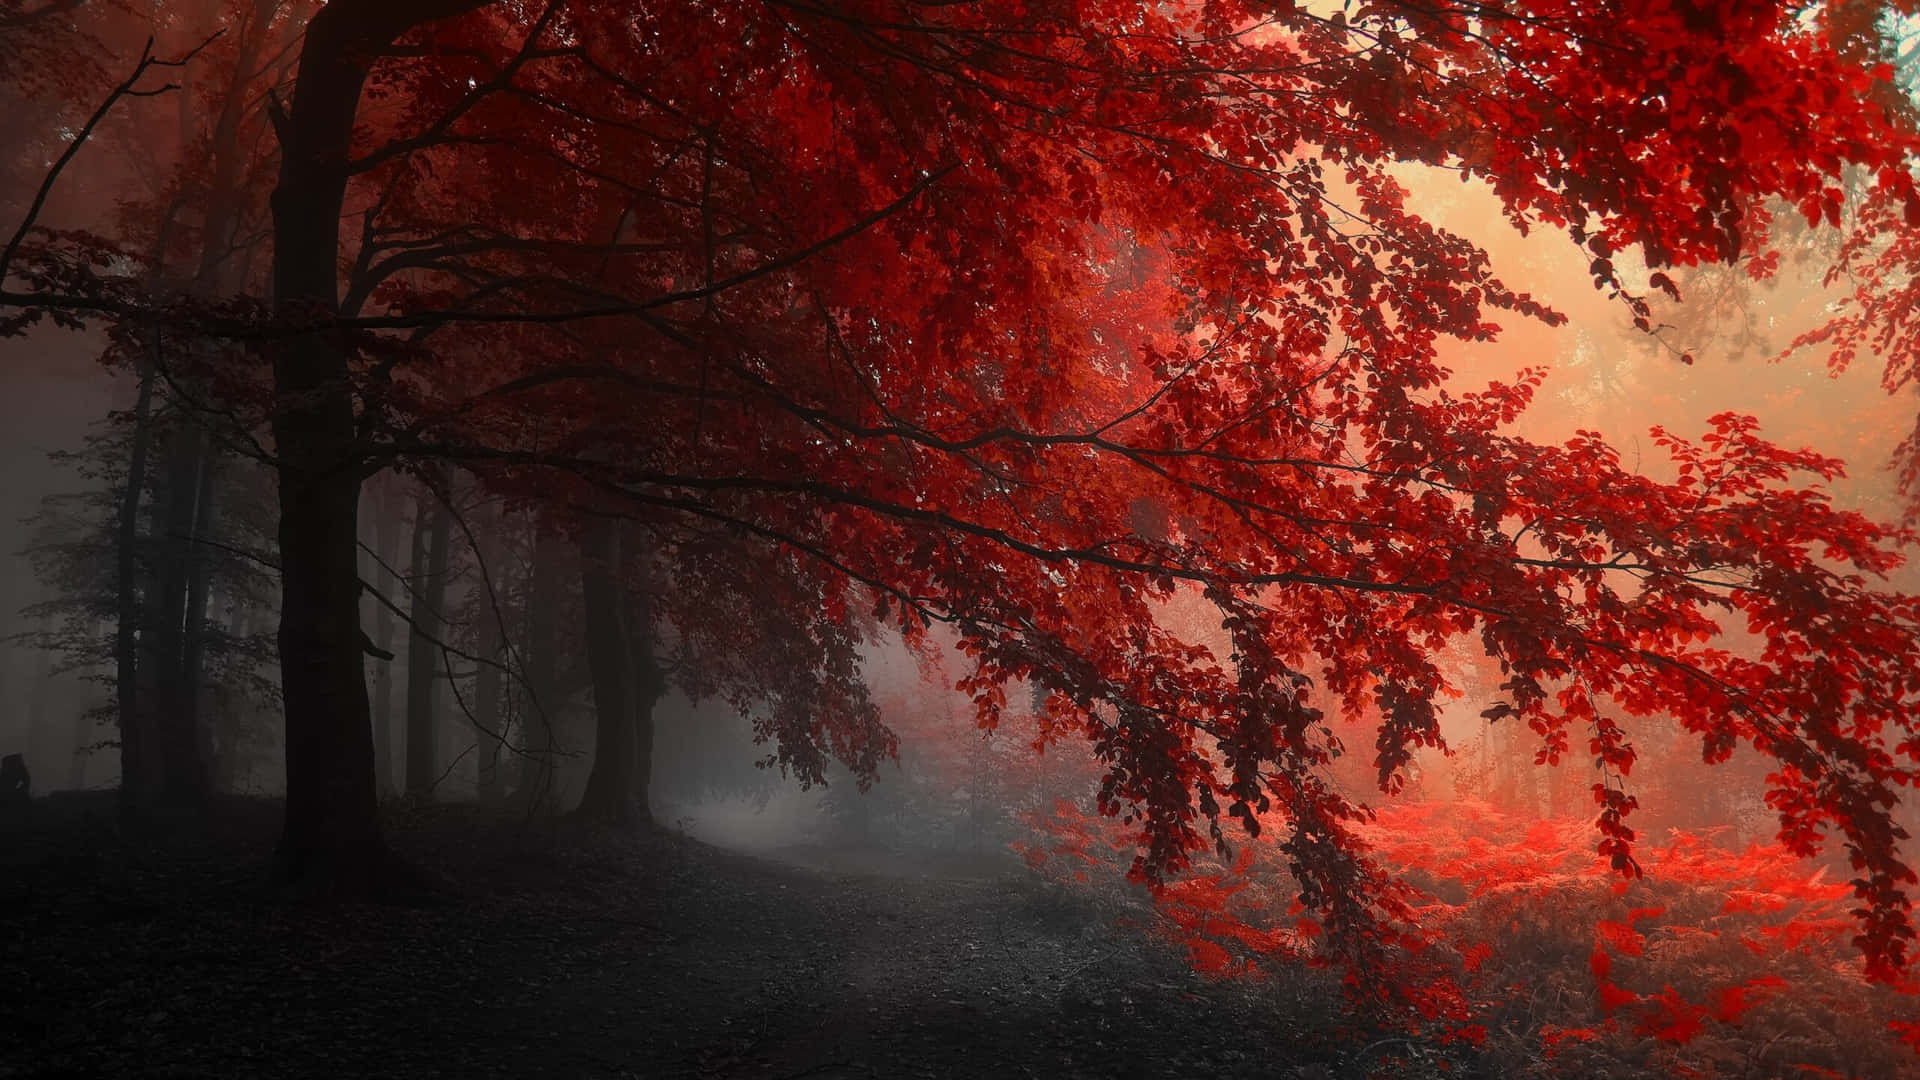 Enchanted Red Tree Standing Majestically in a Misty Wonderland Wallpaper